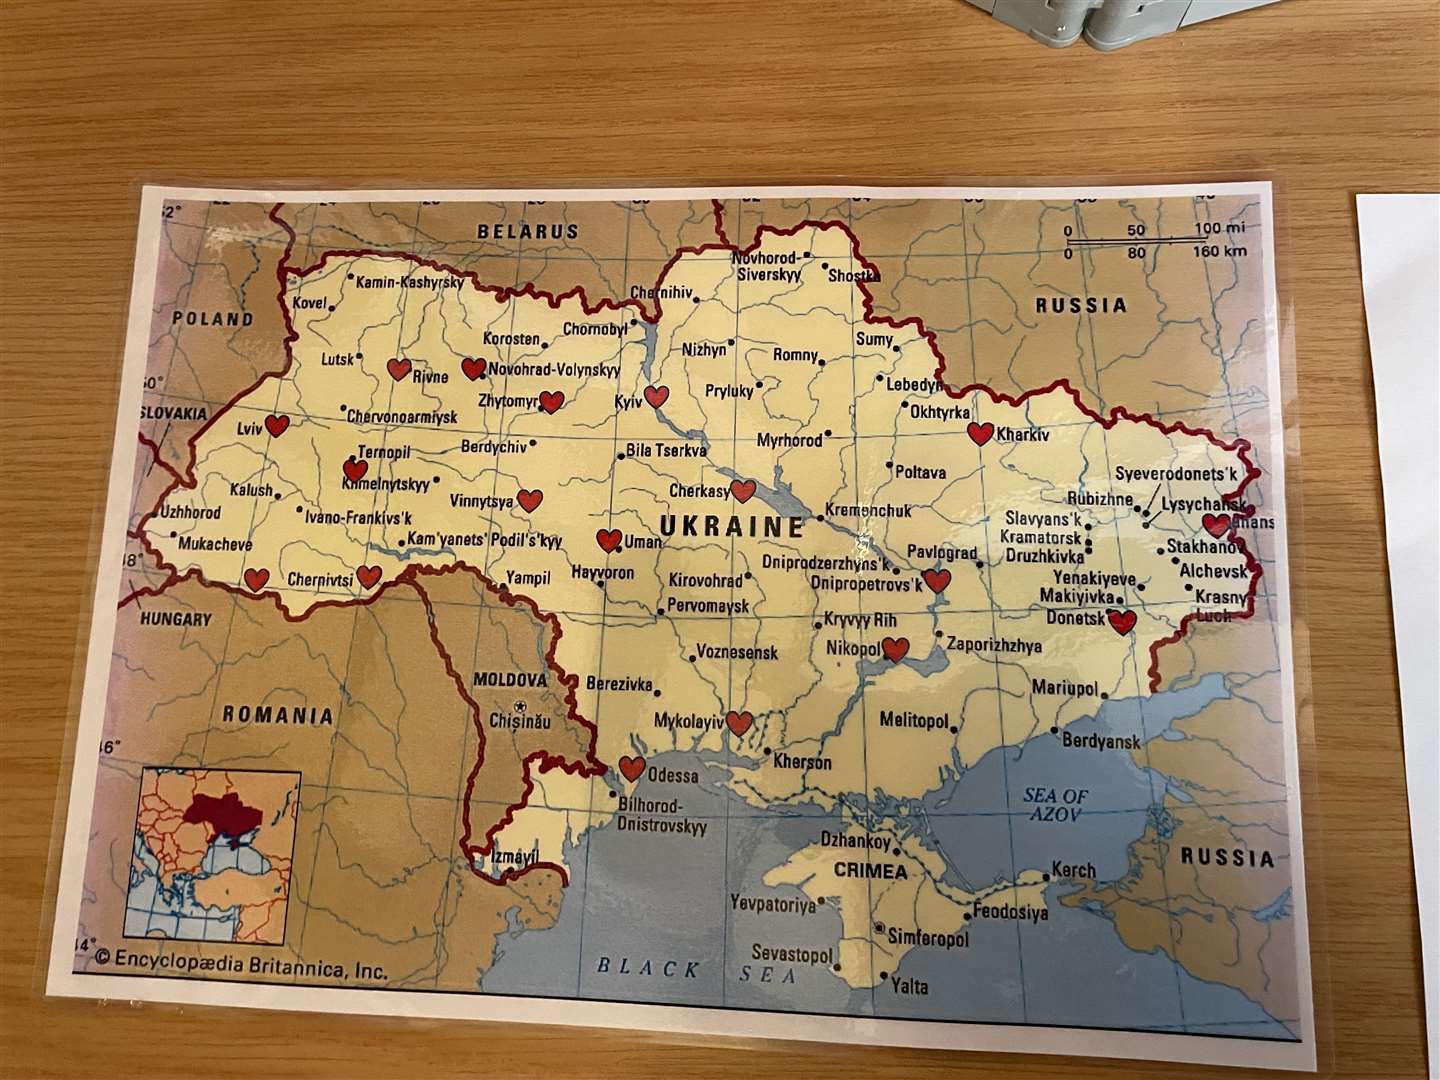 A map of Ukraine as Holy Trinity Church in Coxheath holds an open day